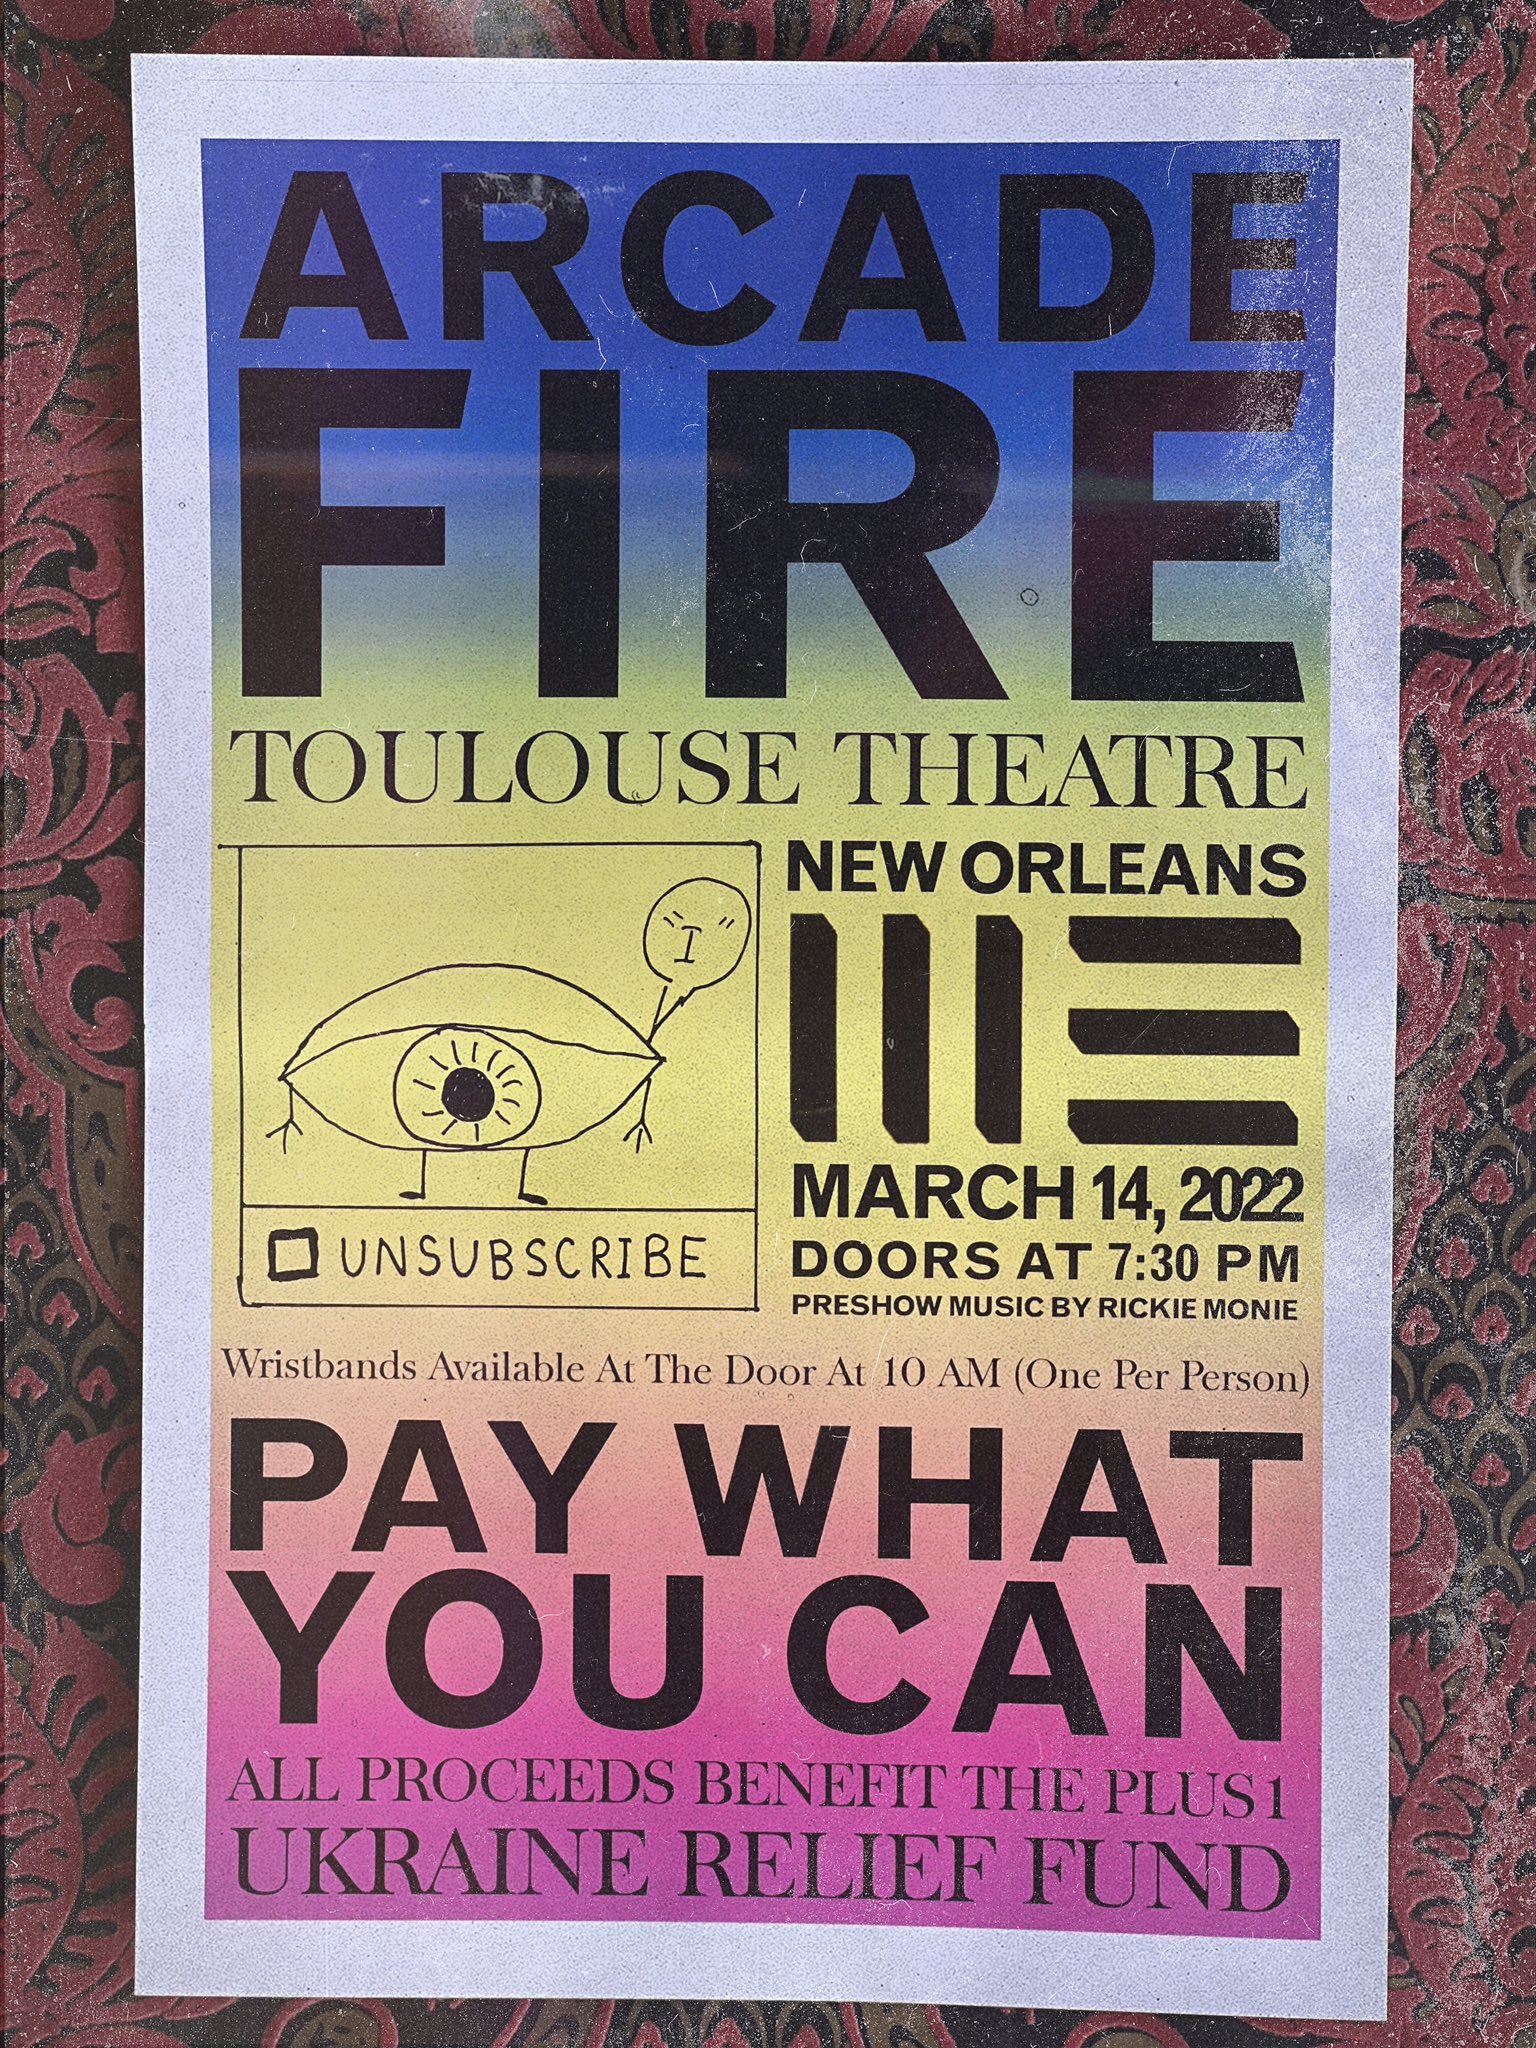 "Pay what you can" @arcadefire